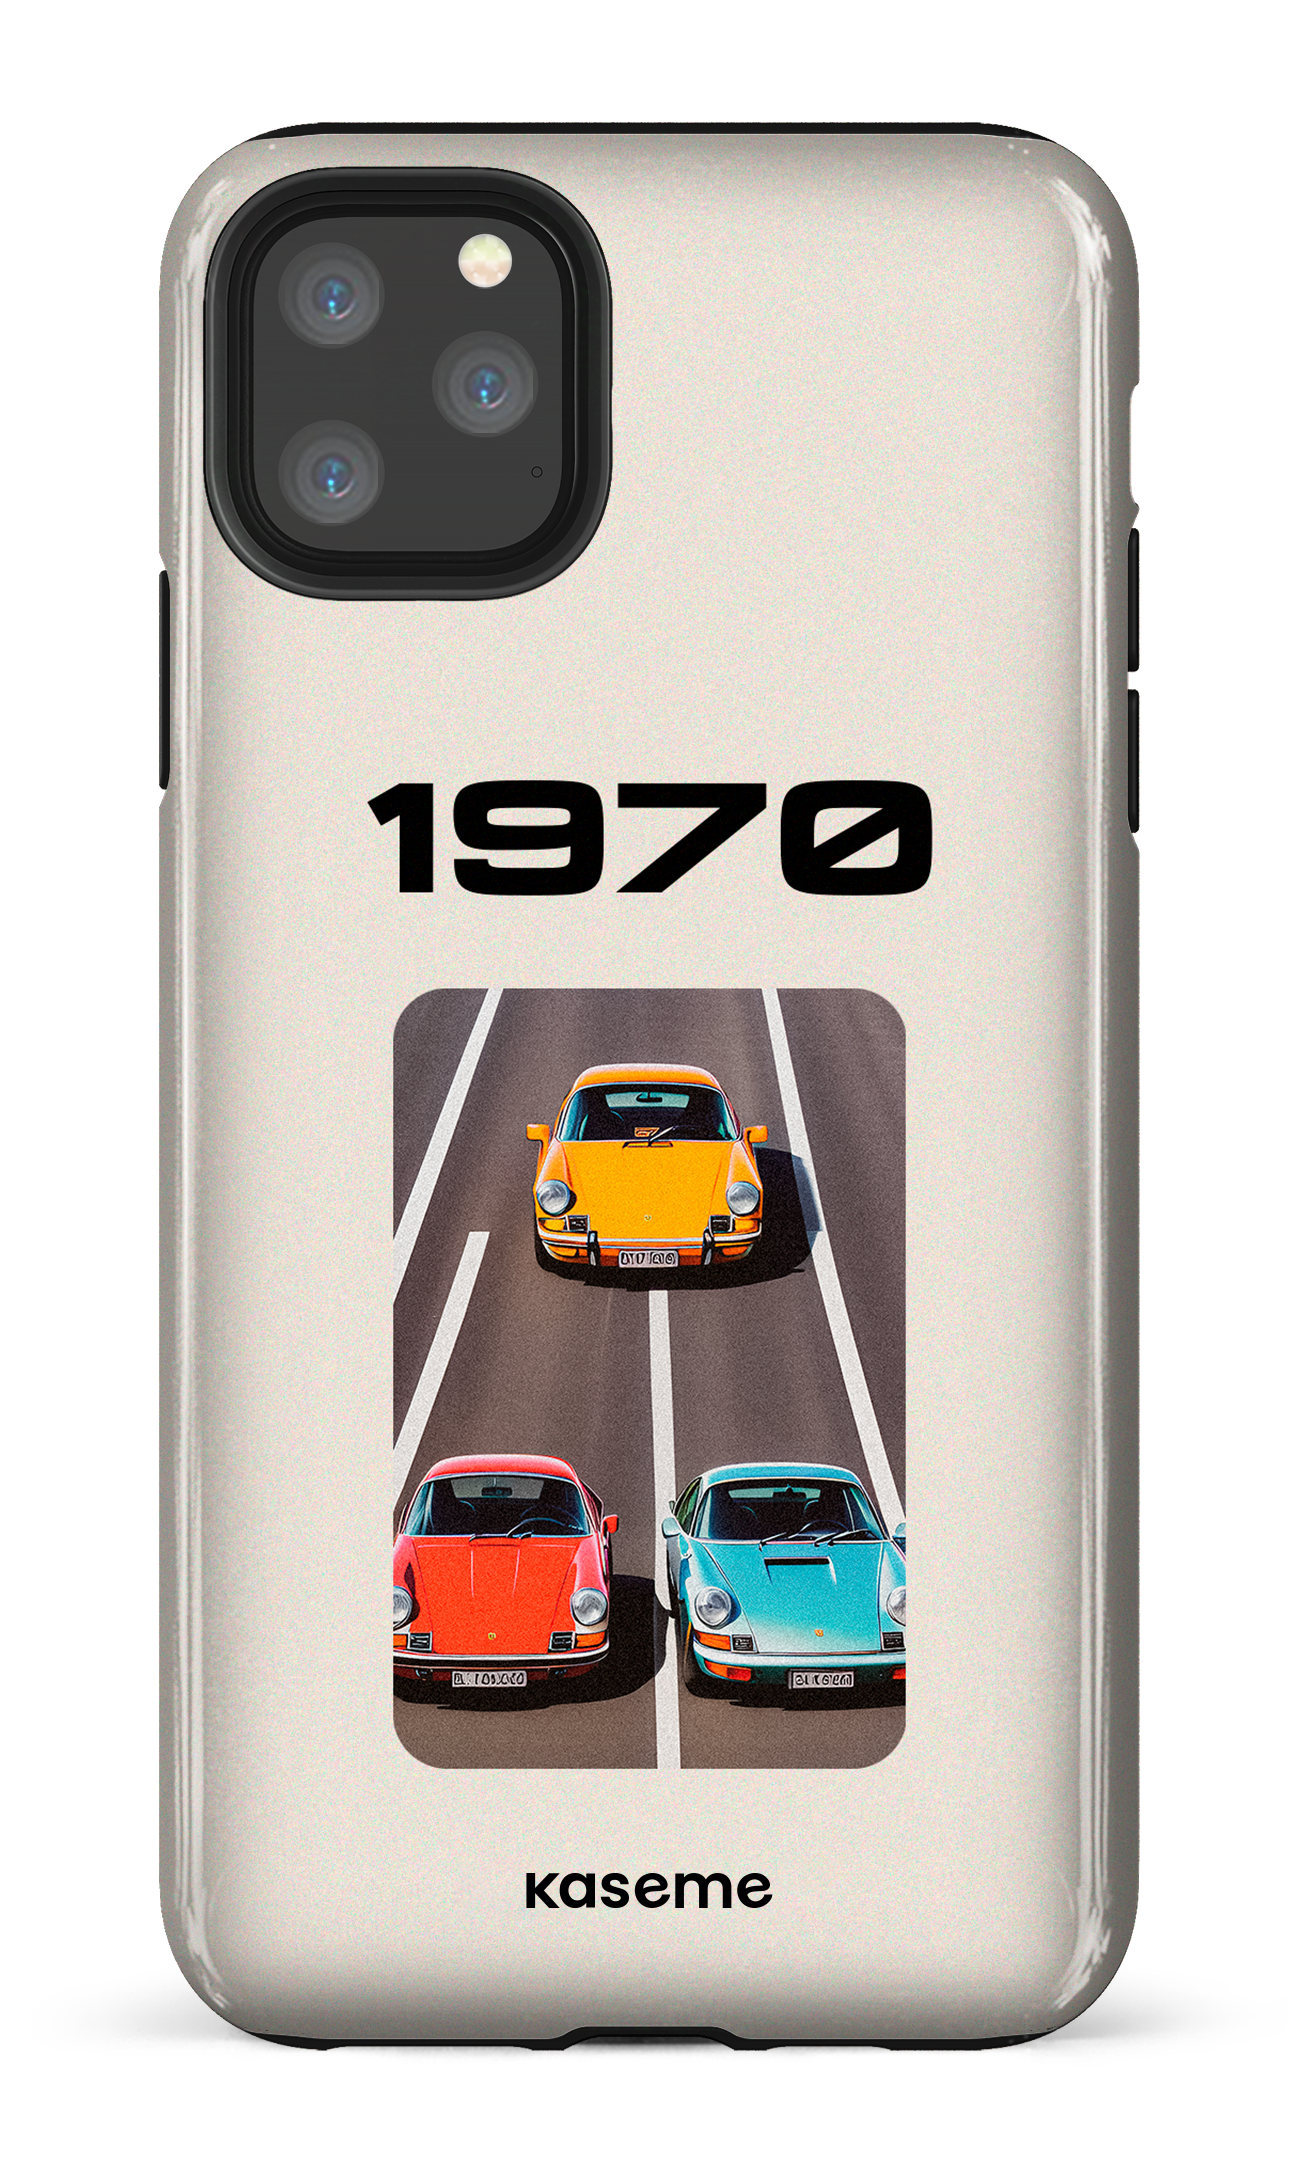 The 1970 - iPhone 11 Pro Max